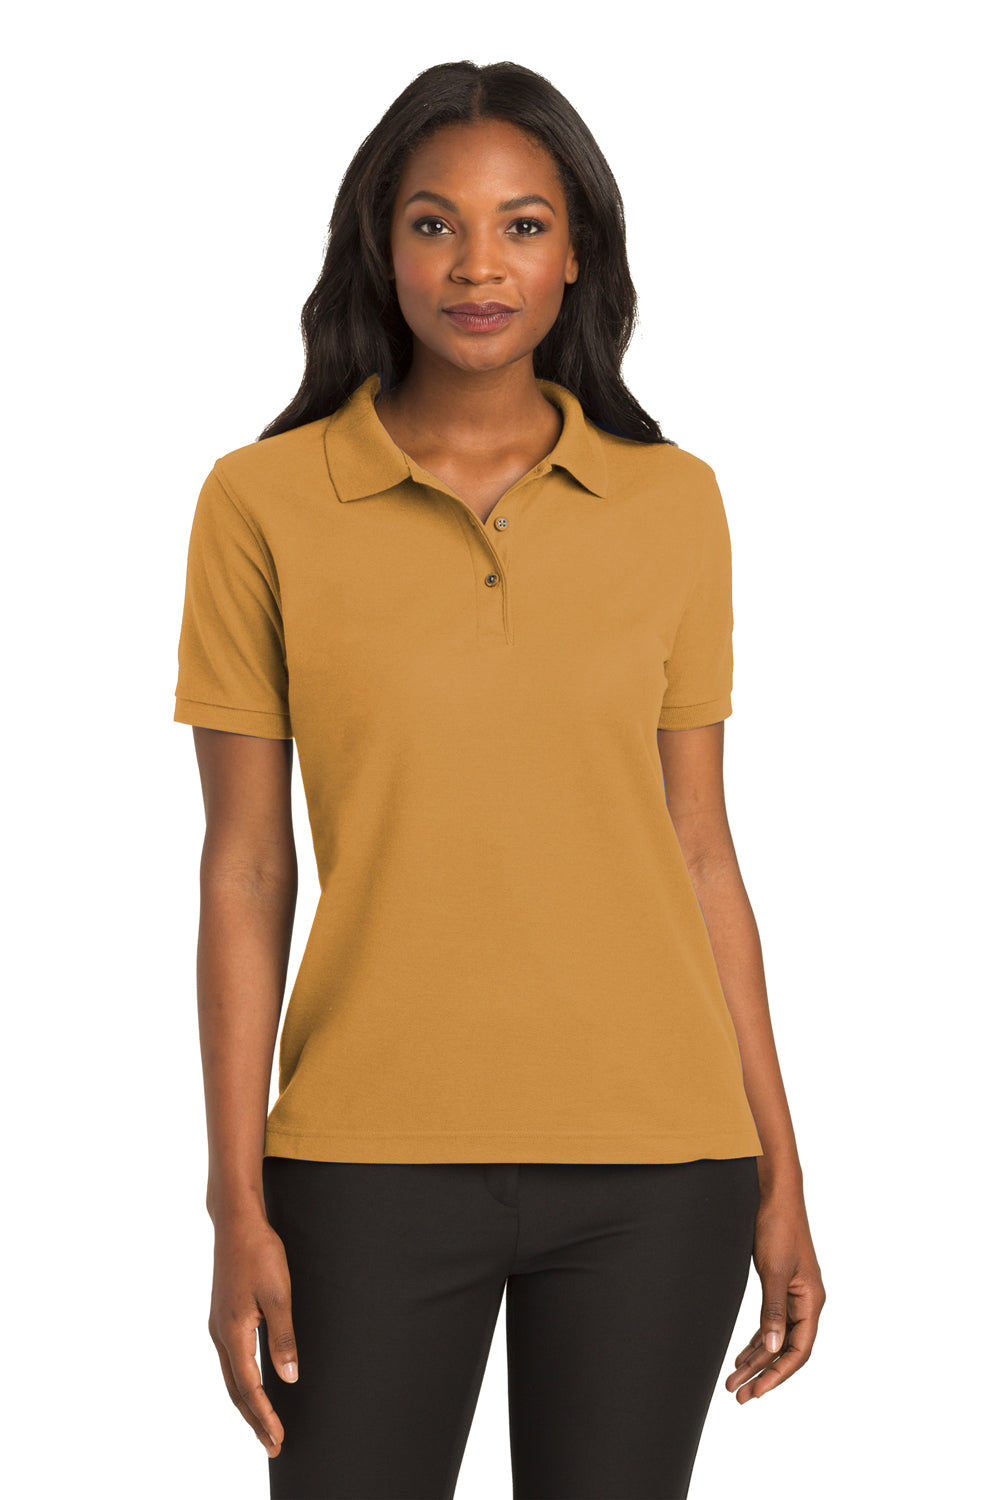 Port Authority L500 Womens Silk Touch Wrinkle Resistant Short Sleeve Polo Shirt Gold Front